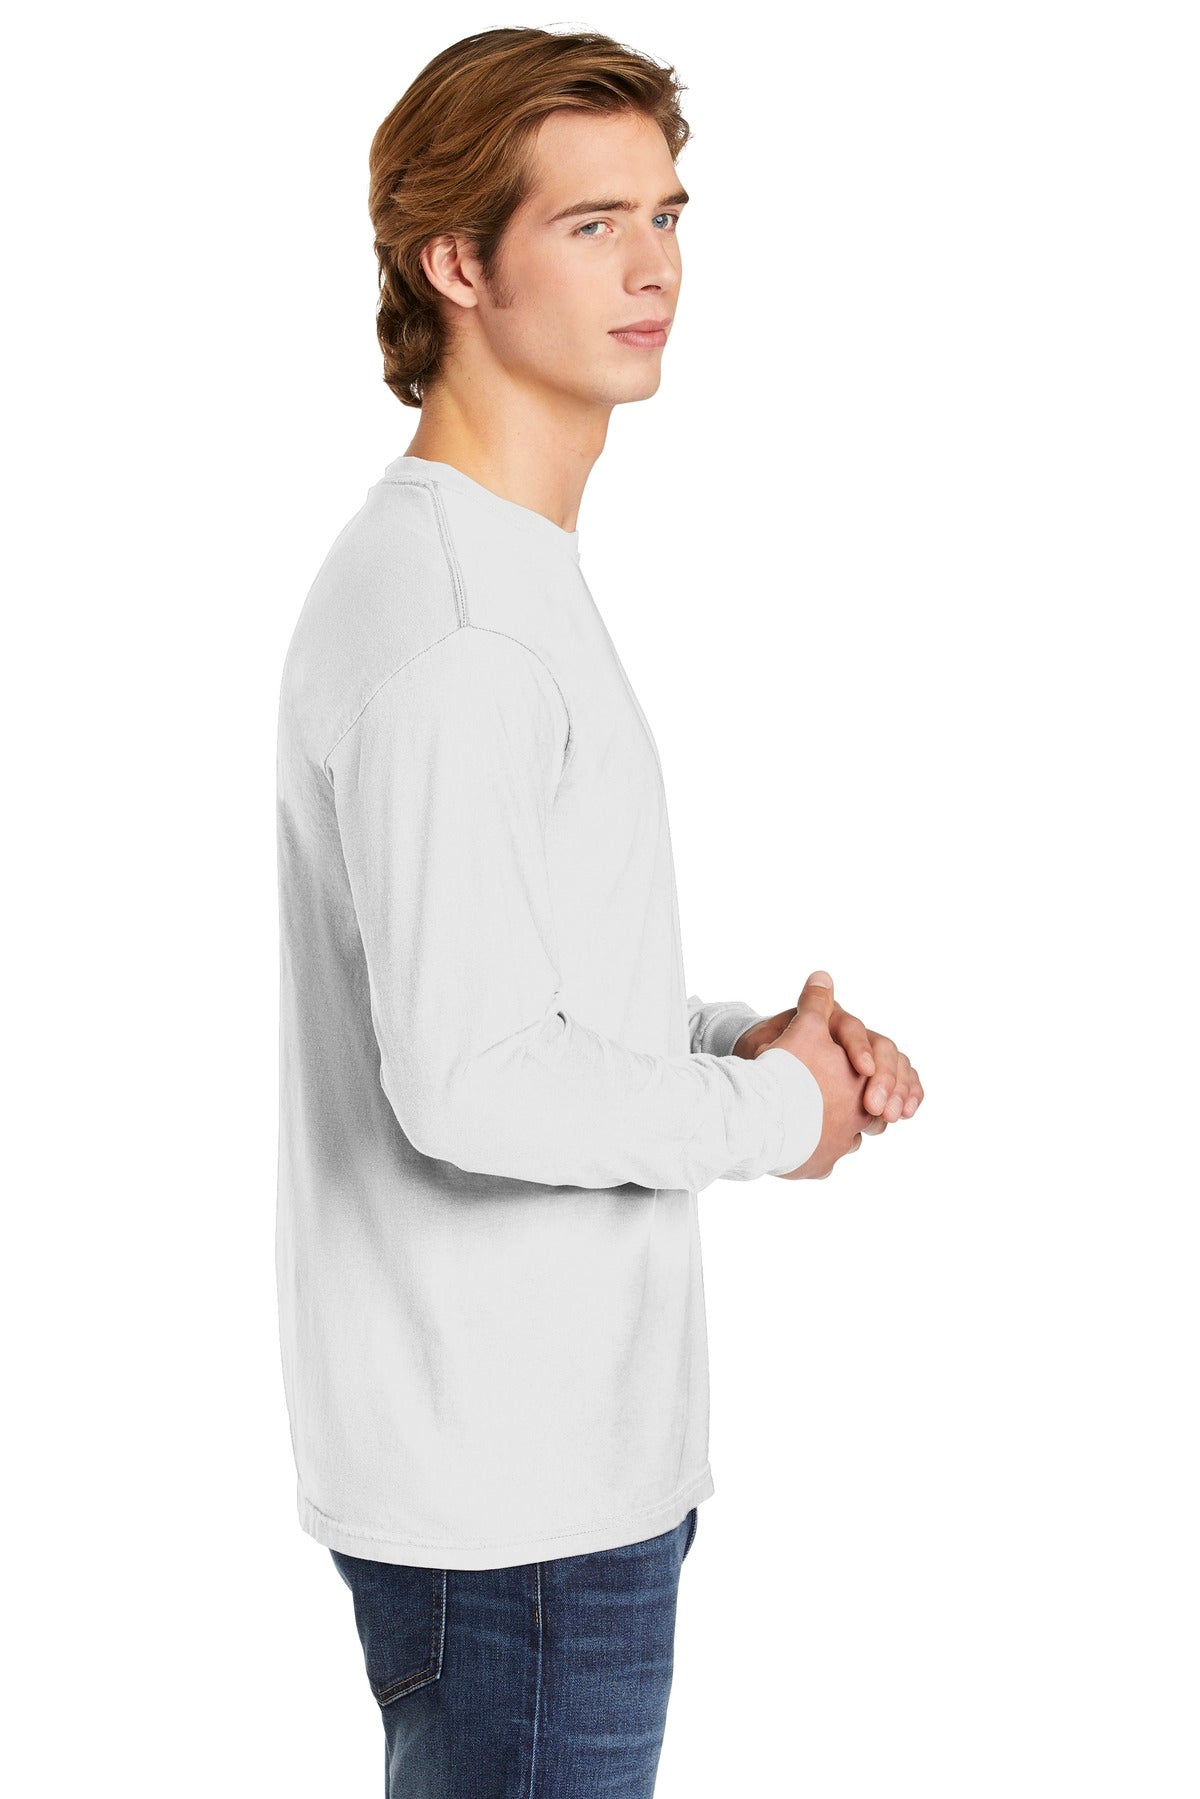 COMFORT COLORS ® Heavyweight Ring Spun Long Sleeve Tee. 6014 [White] - DFW Impression